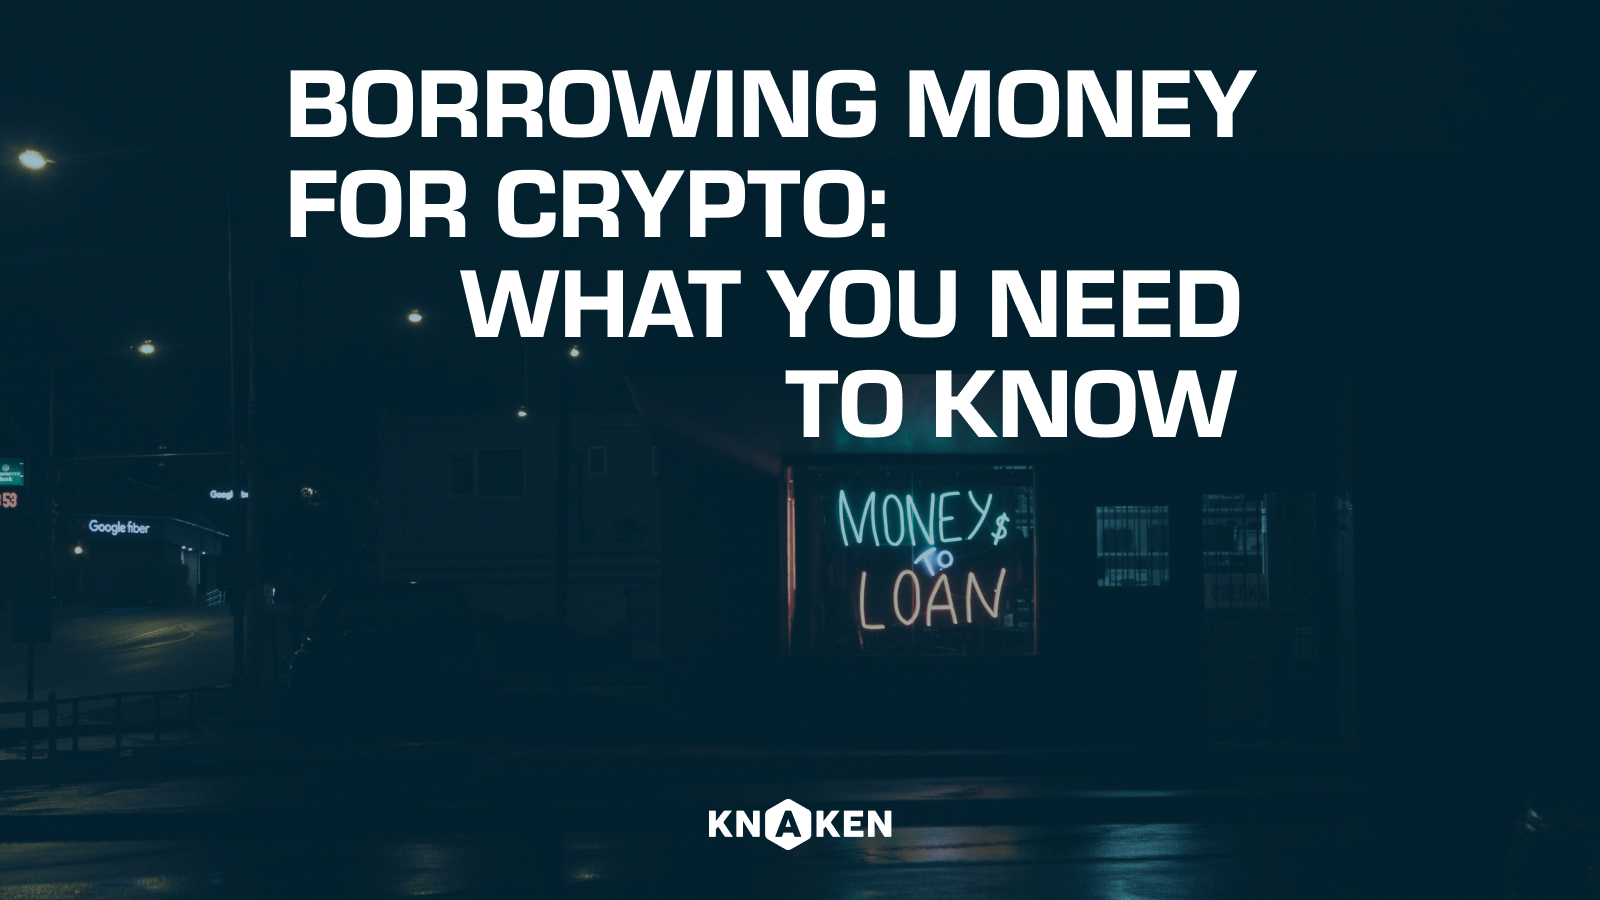 Borrowing Money for Crypto: What You Need to Know